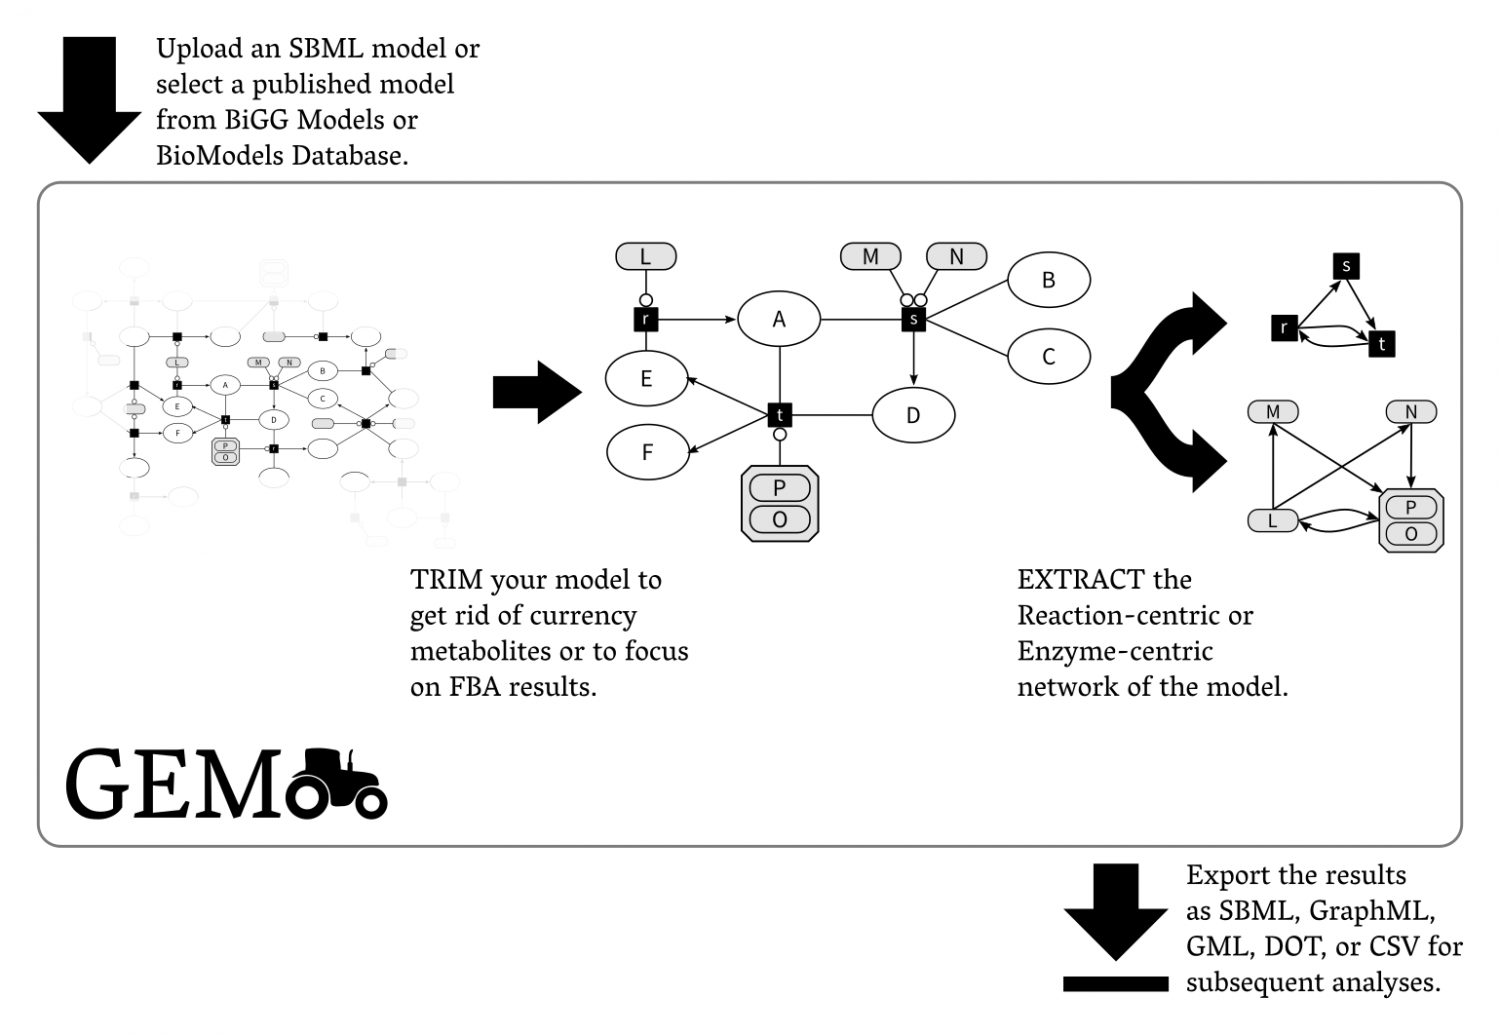 The workflow when using the GEMtractor: A user selects a model, trims undesired entities, extracts a view into the model, and exports the results in exchangeable formats.